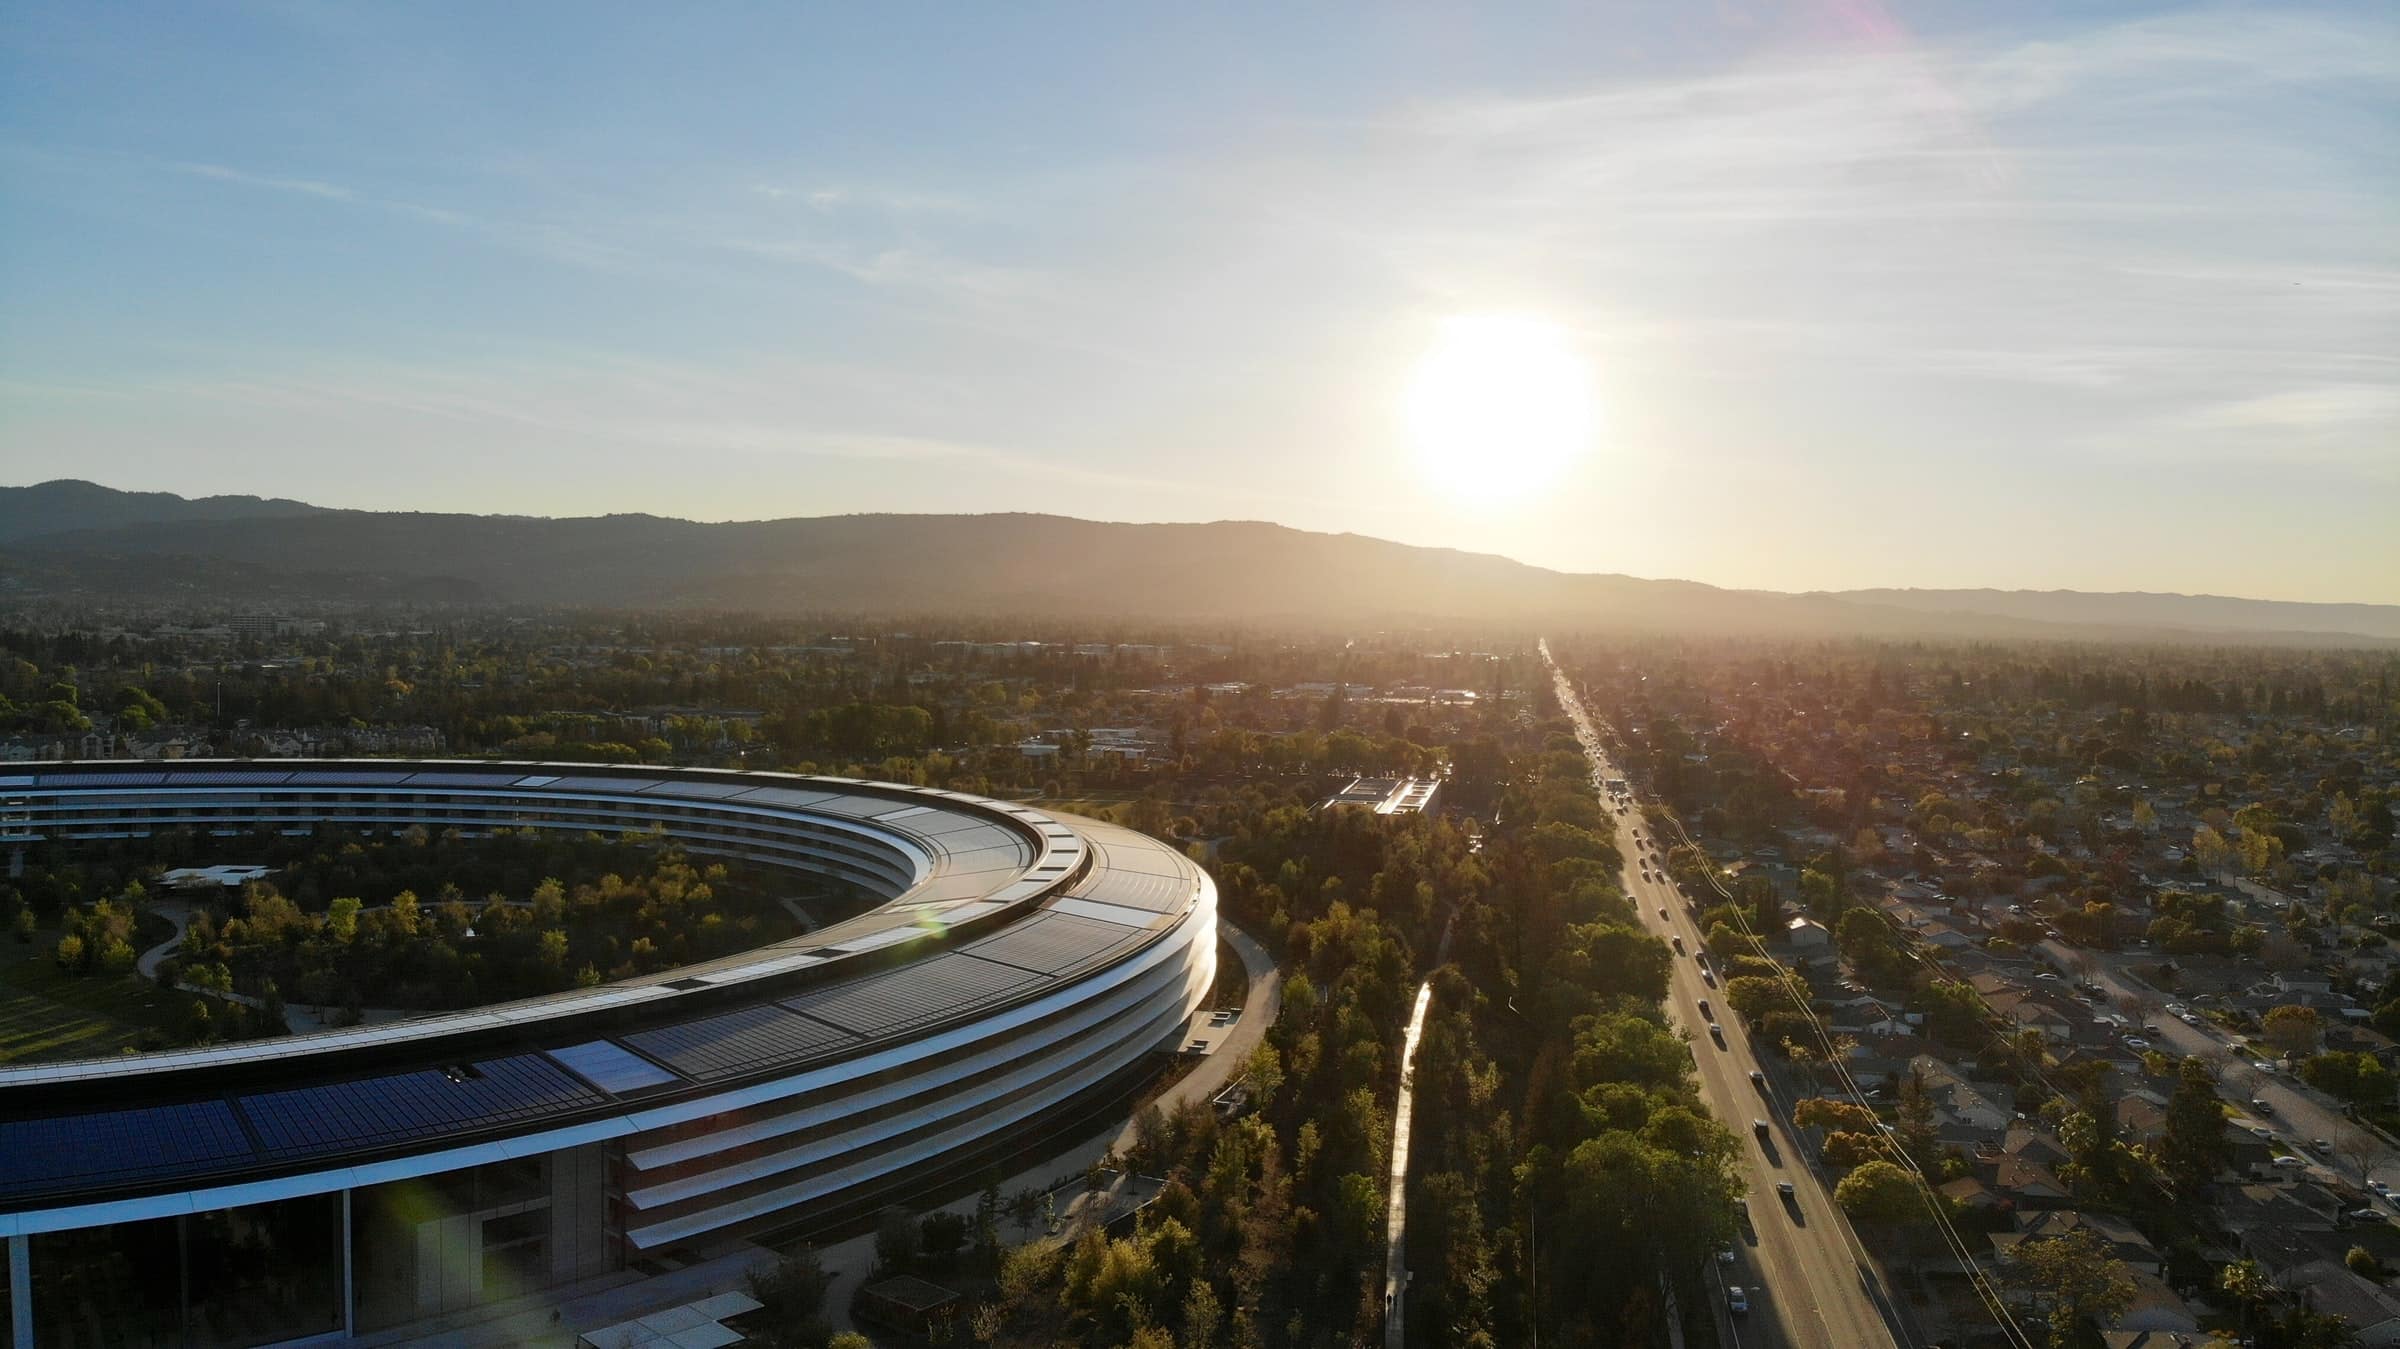 Apple employees on the verge of quitting over strict remote work policy